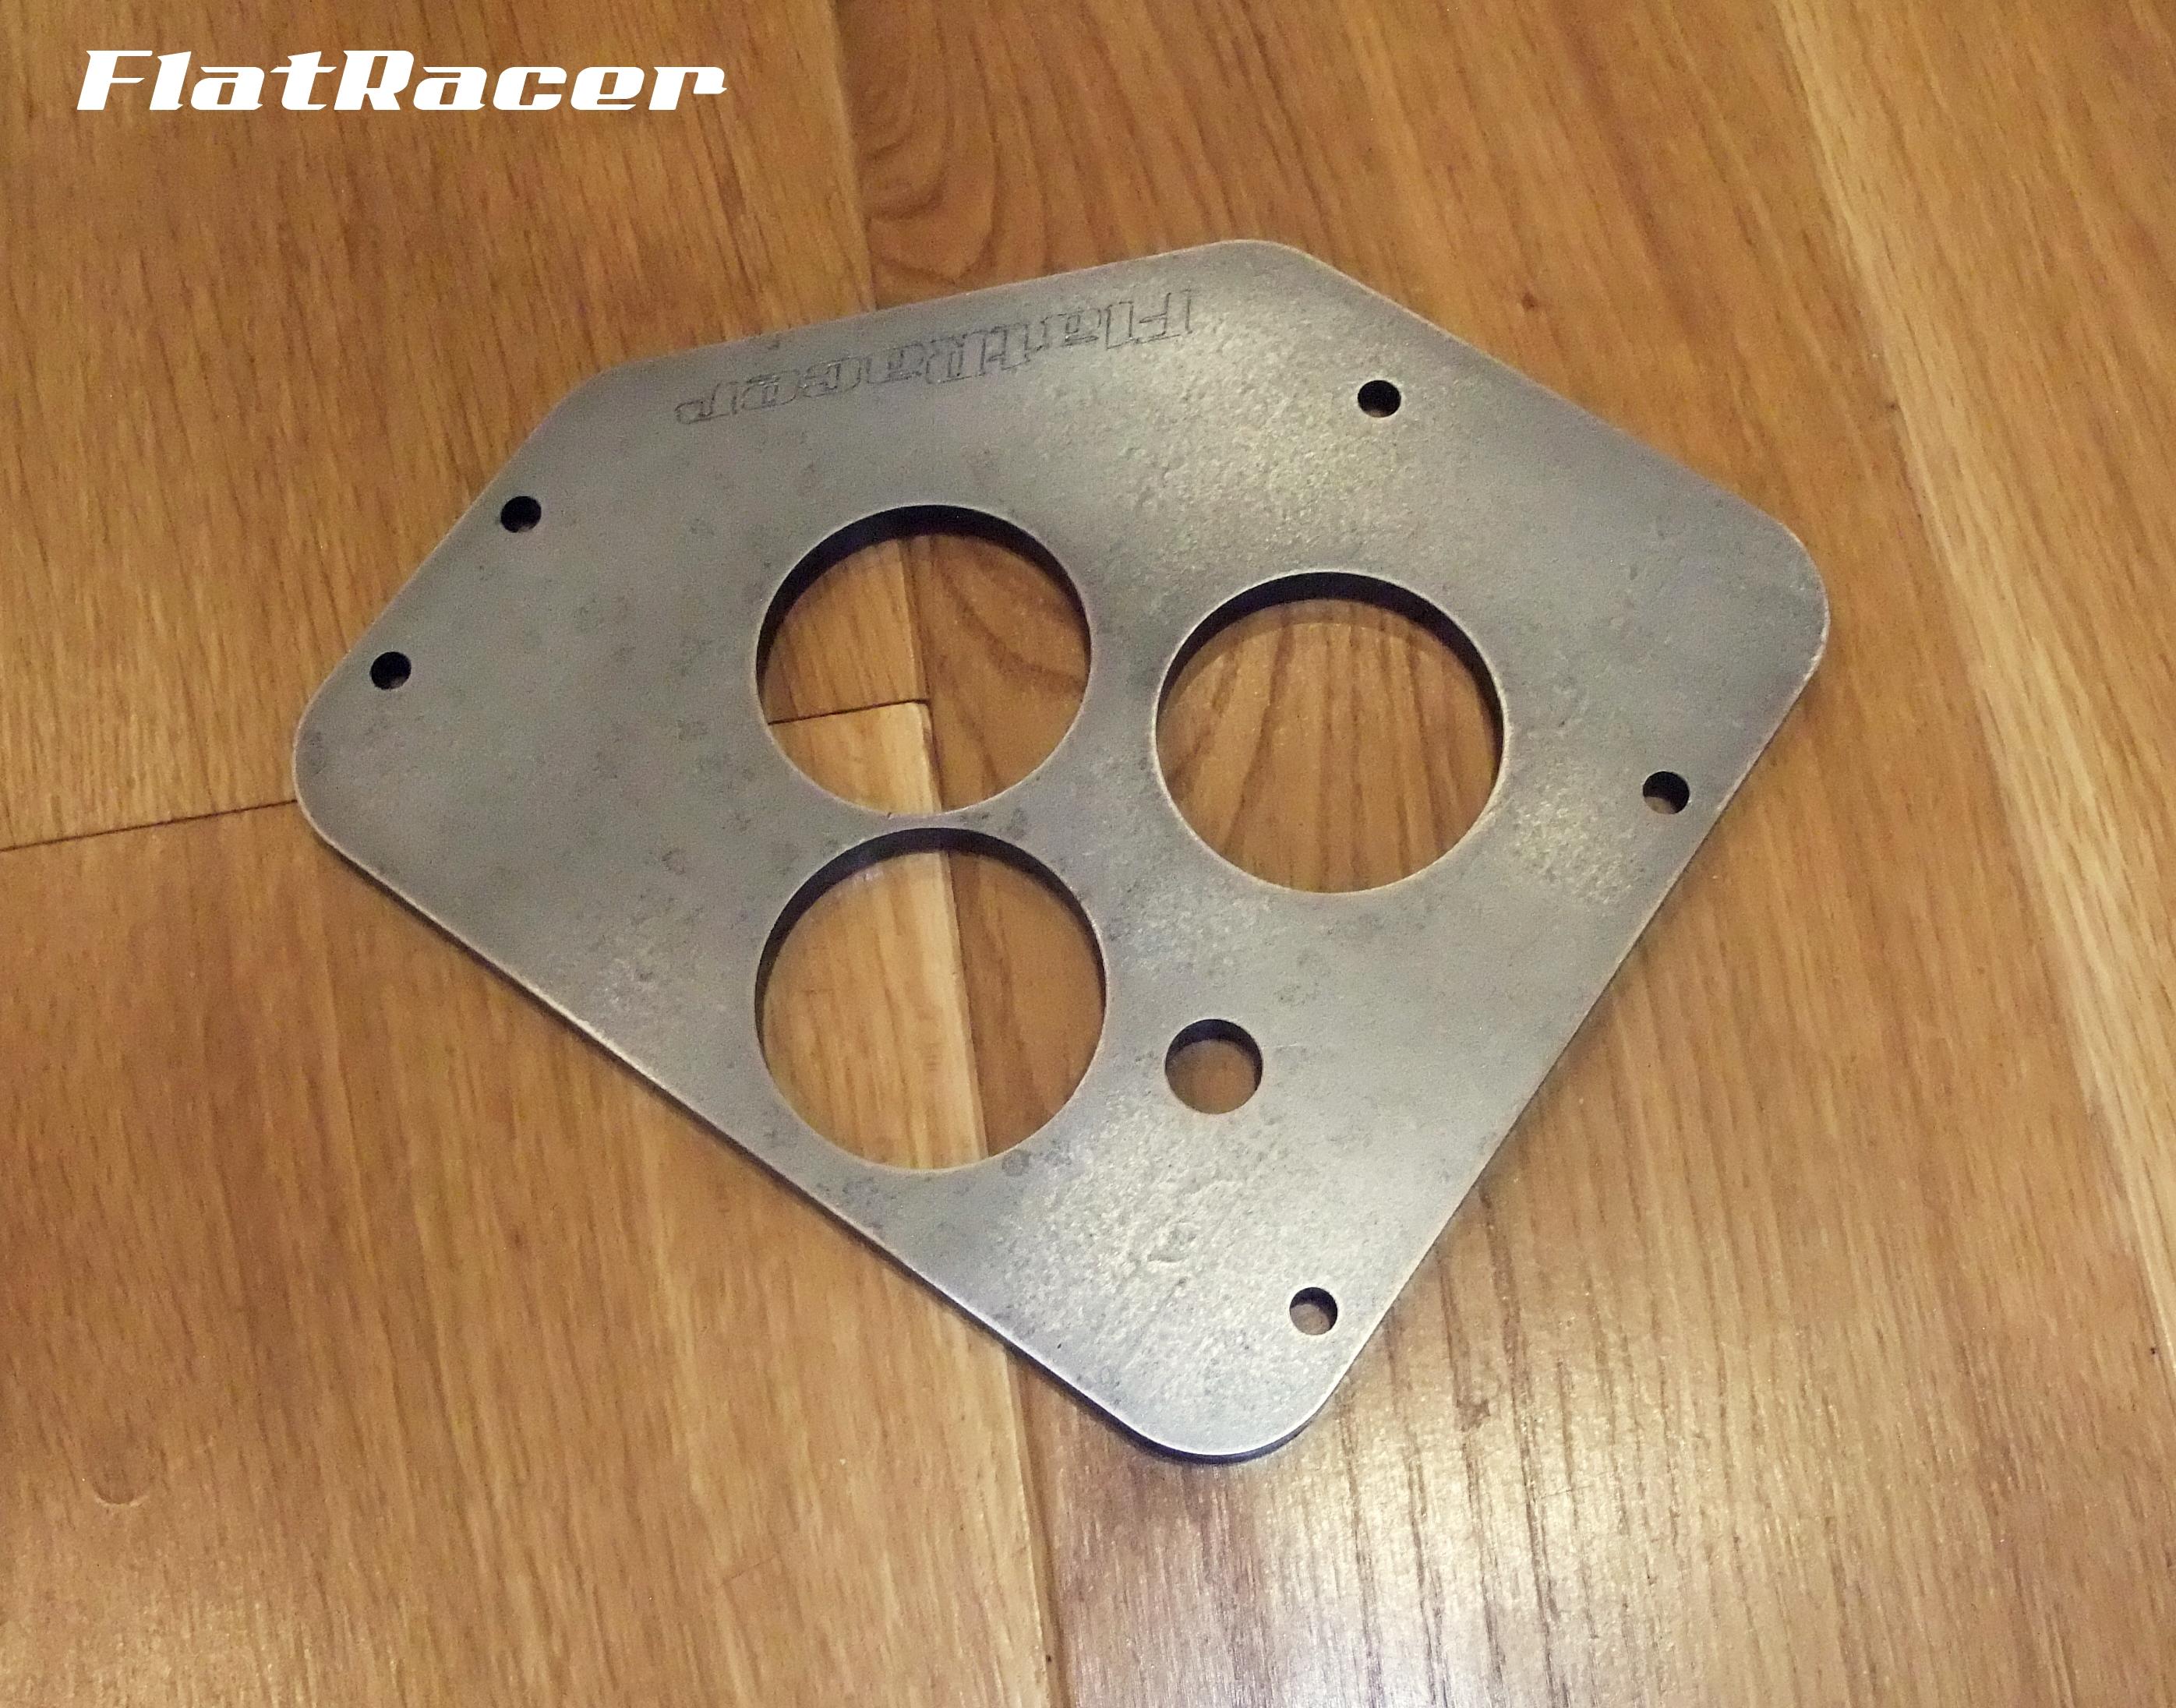 FlatRacer BMW Airhead Boxer 5 speed gearbox (74 on) shim plate tool - 23 3 650